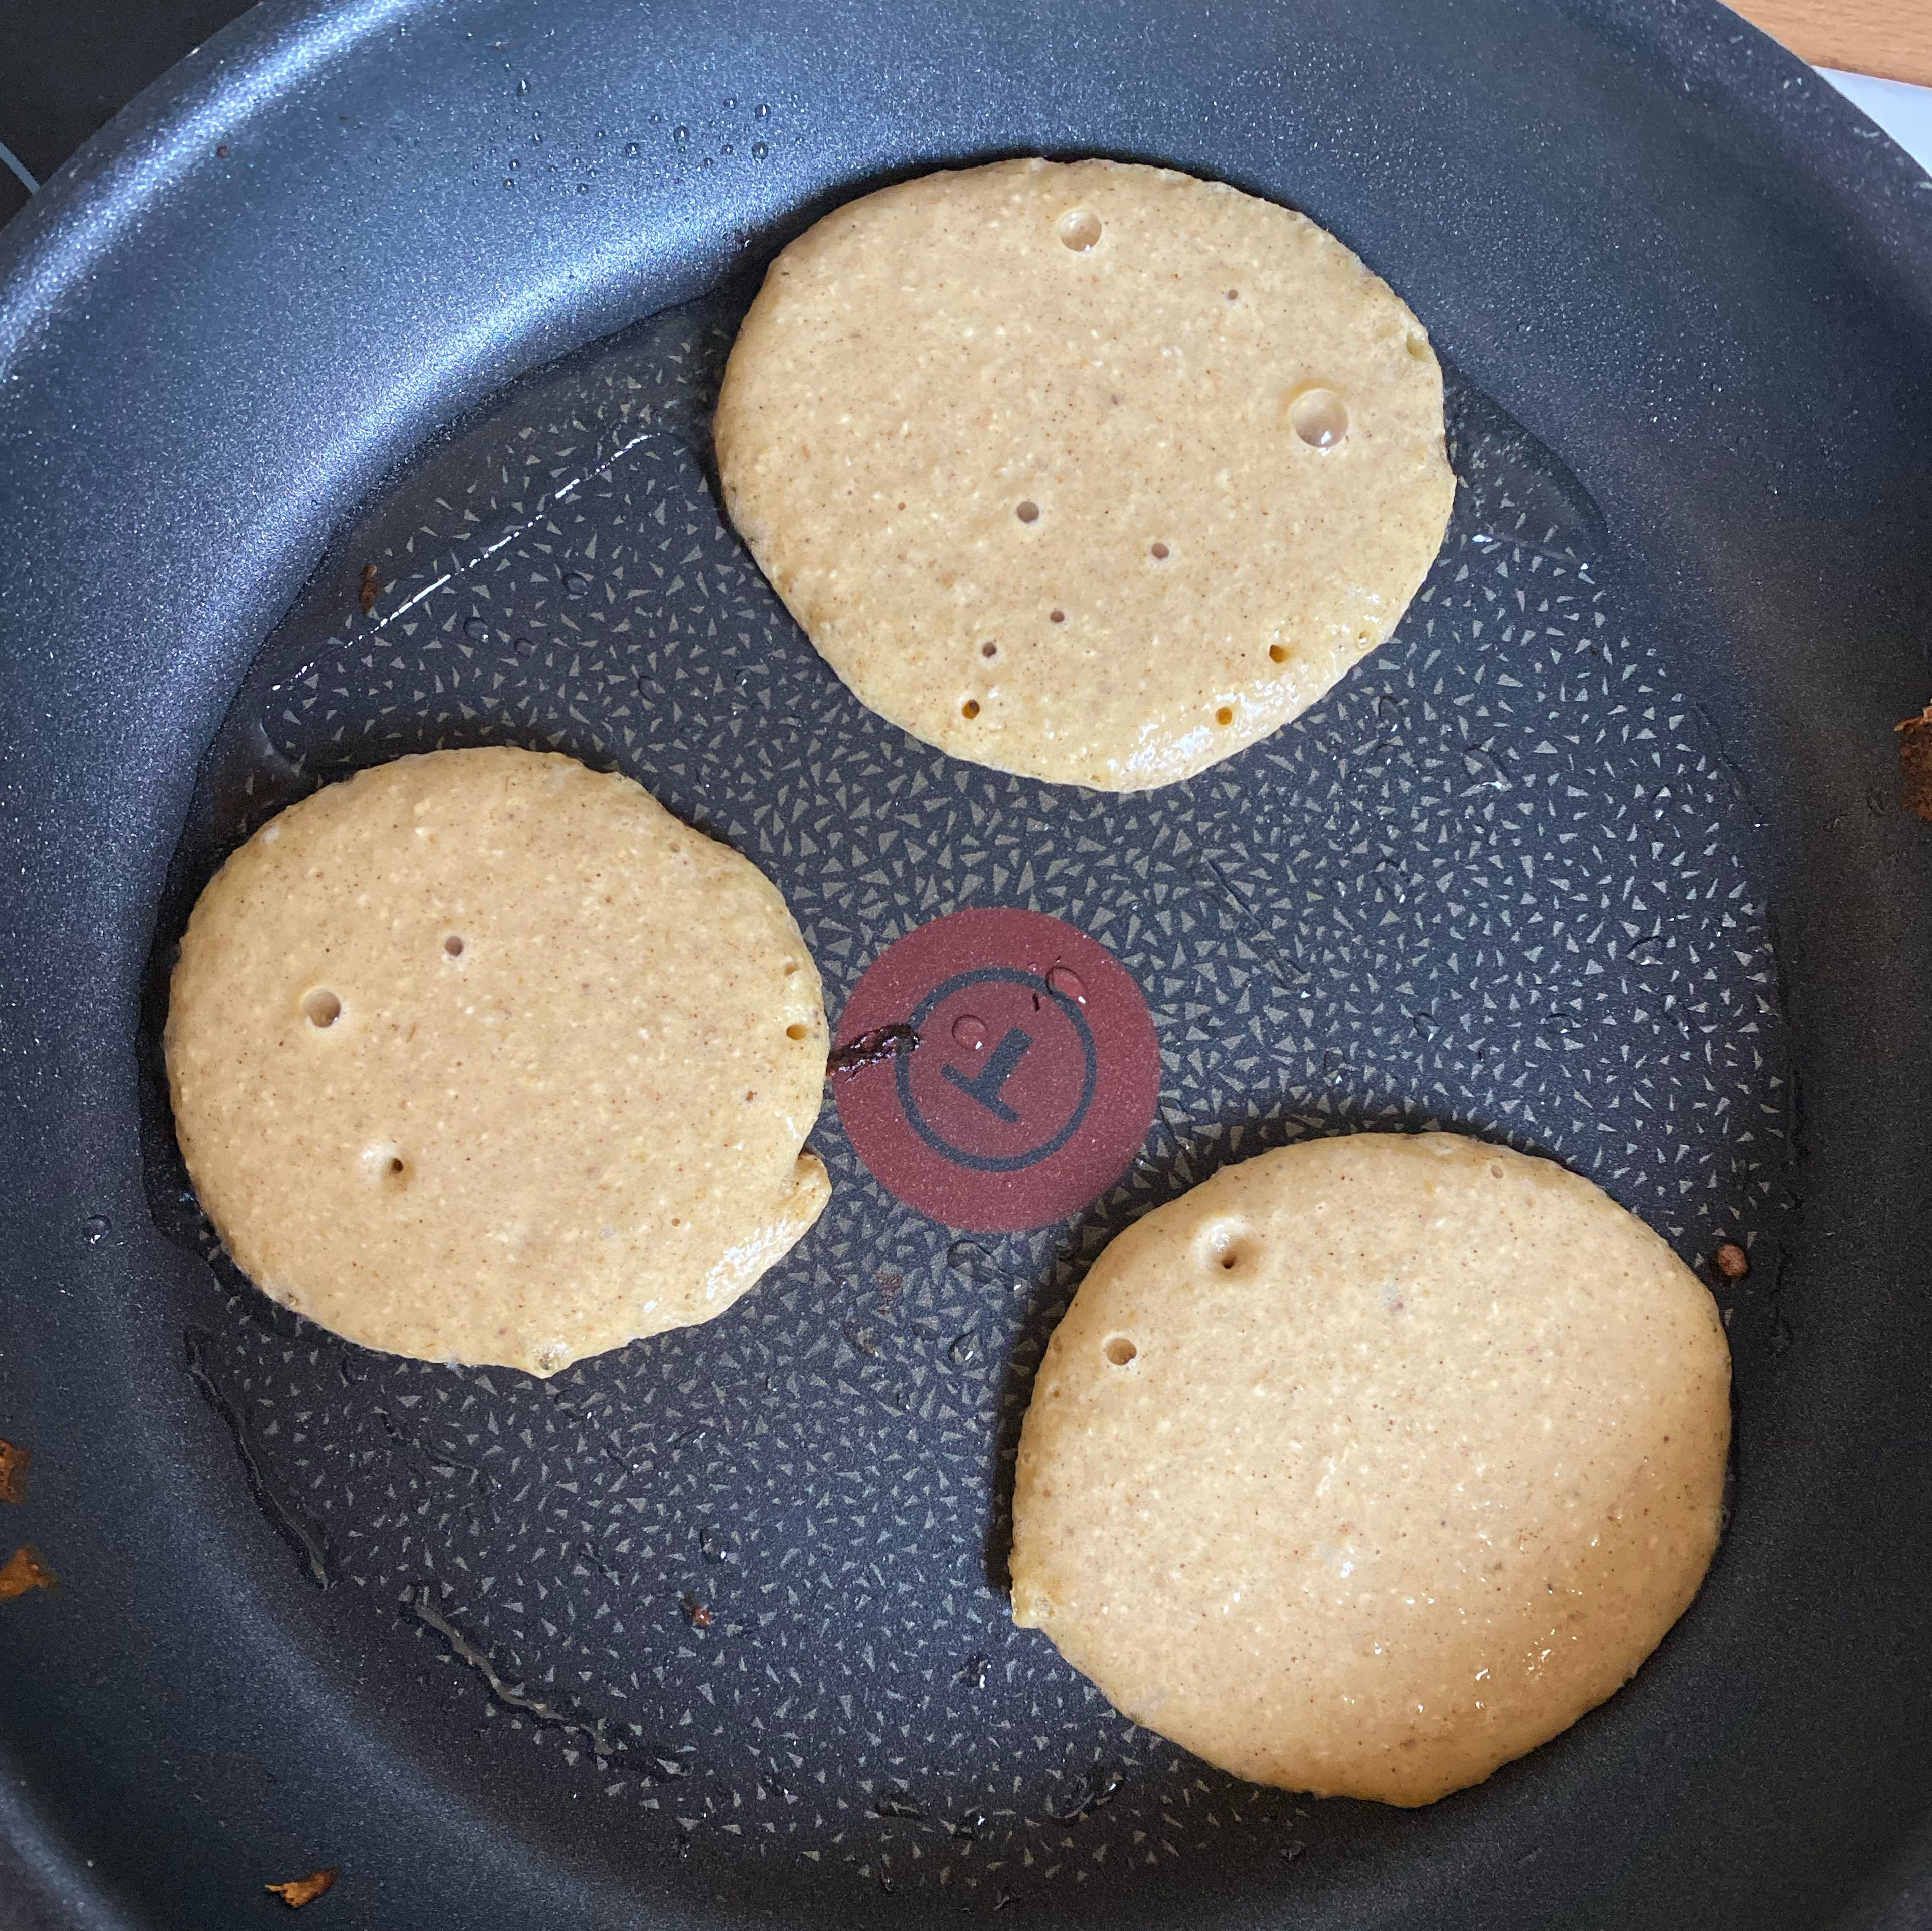 Spread coconut oil to the pan before frying each pancake. Use a ladle to count the portion for each pancake. Wait 1 min max and carefully flip the pancake using a spatula. Repeat until the mixture is finished.